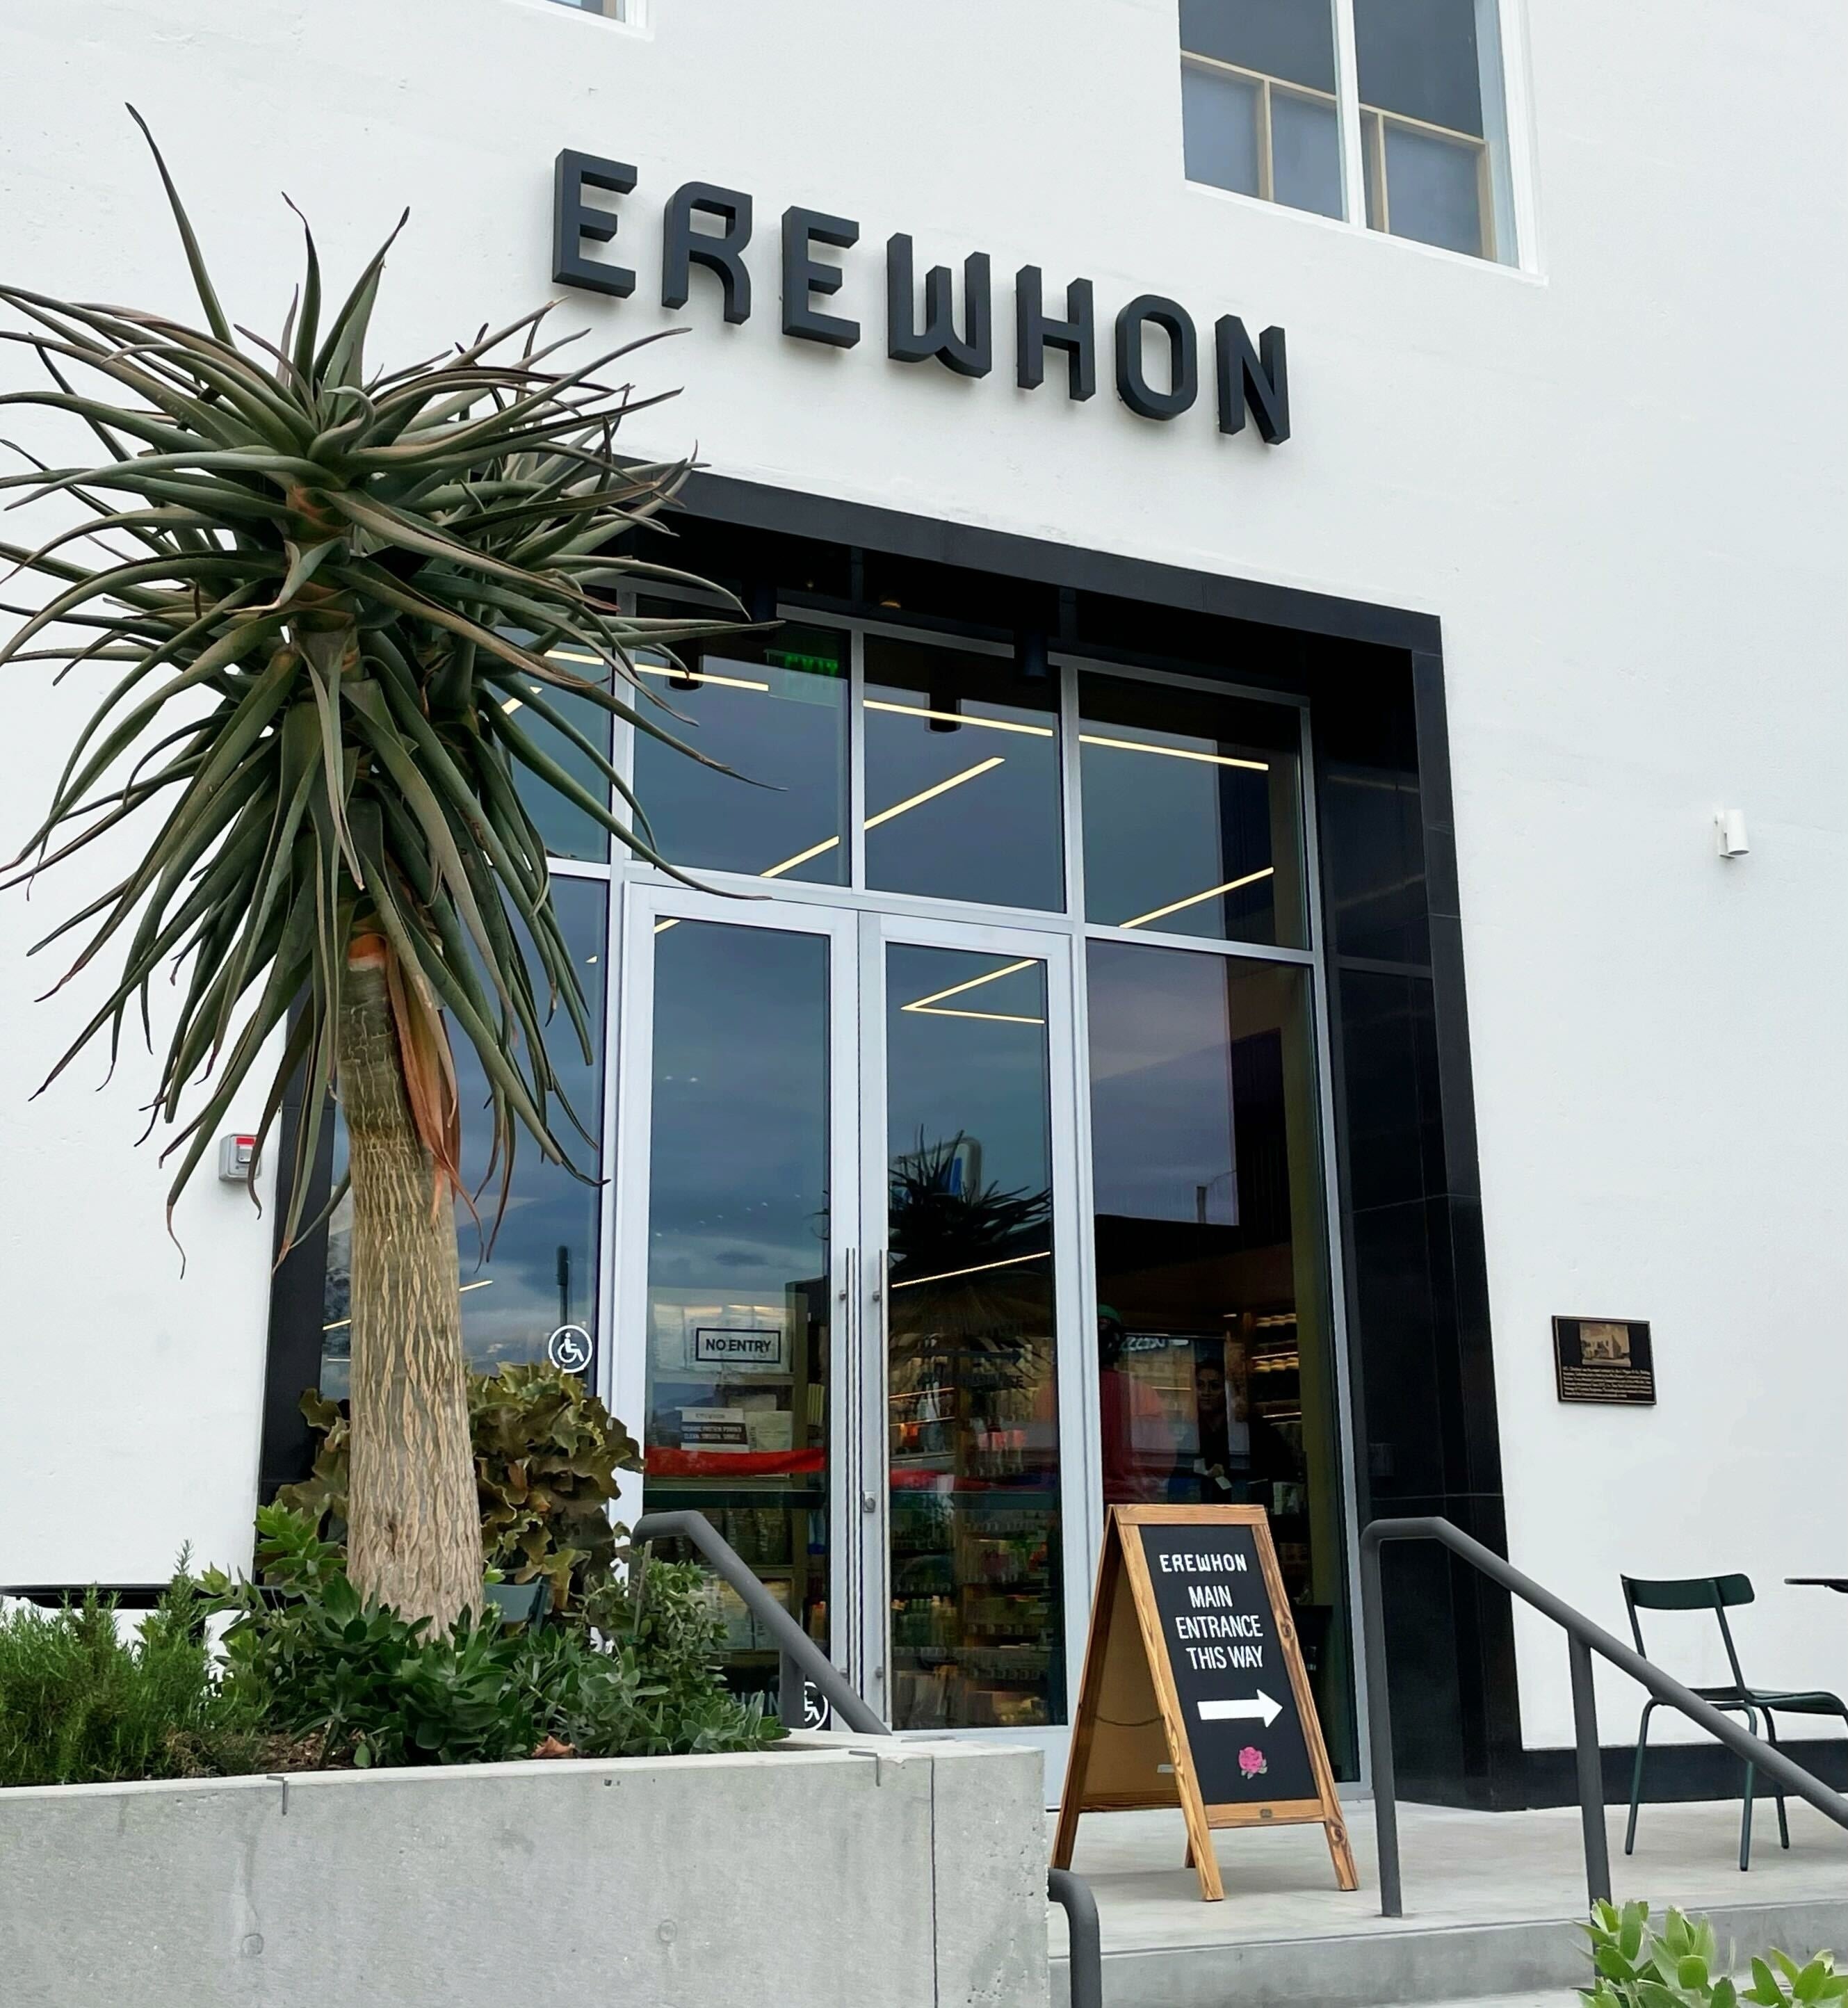 The Erewhon location in Pasadena is being shown